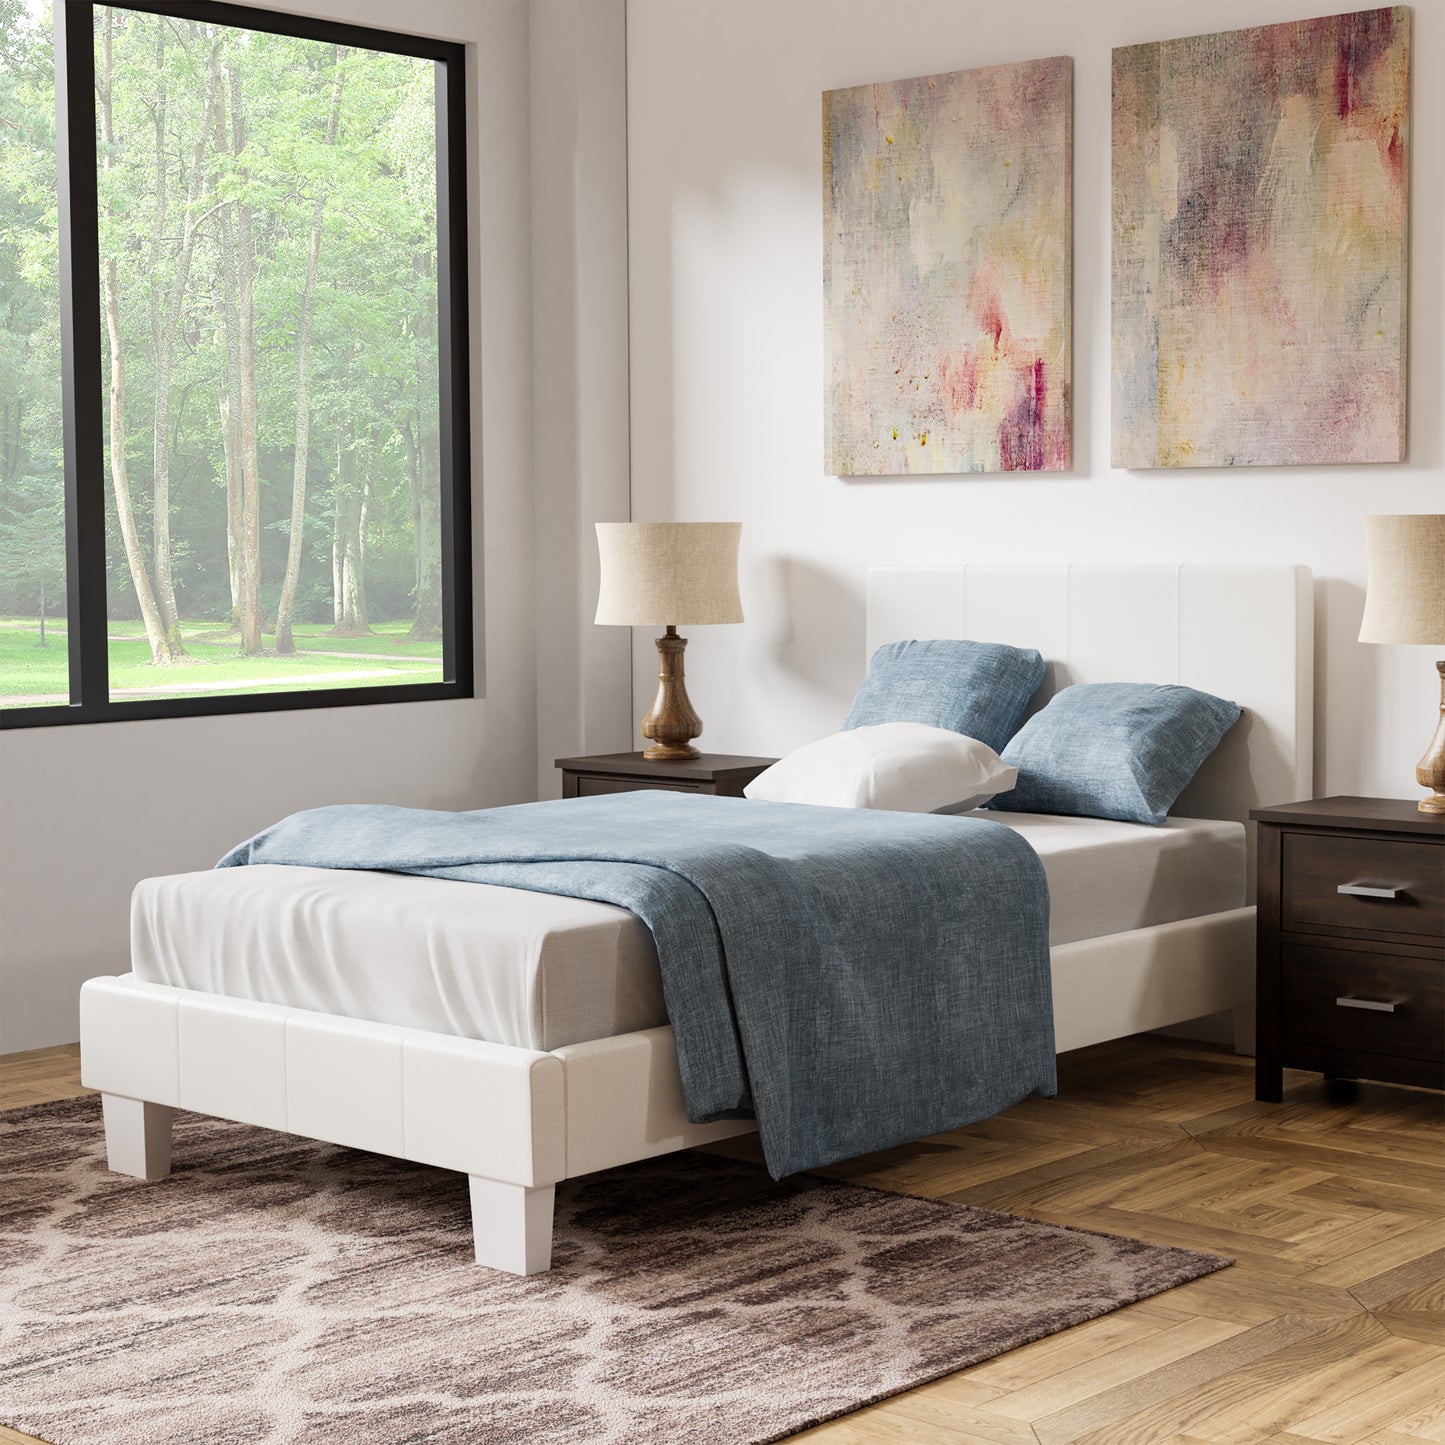 Left angled contemporary white faux leather twin platform bed in a bedroom with accessories